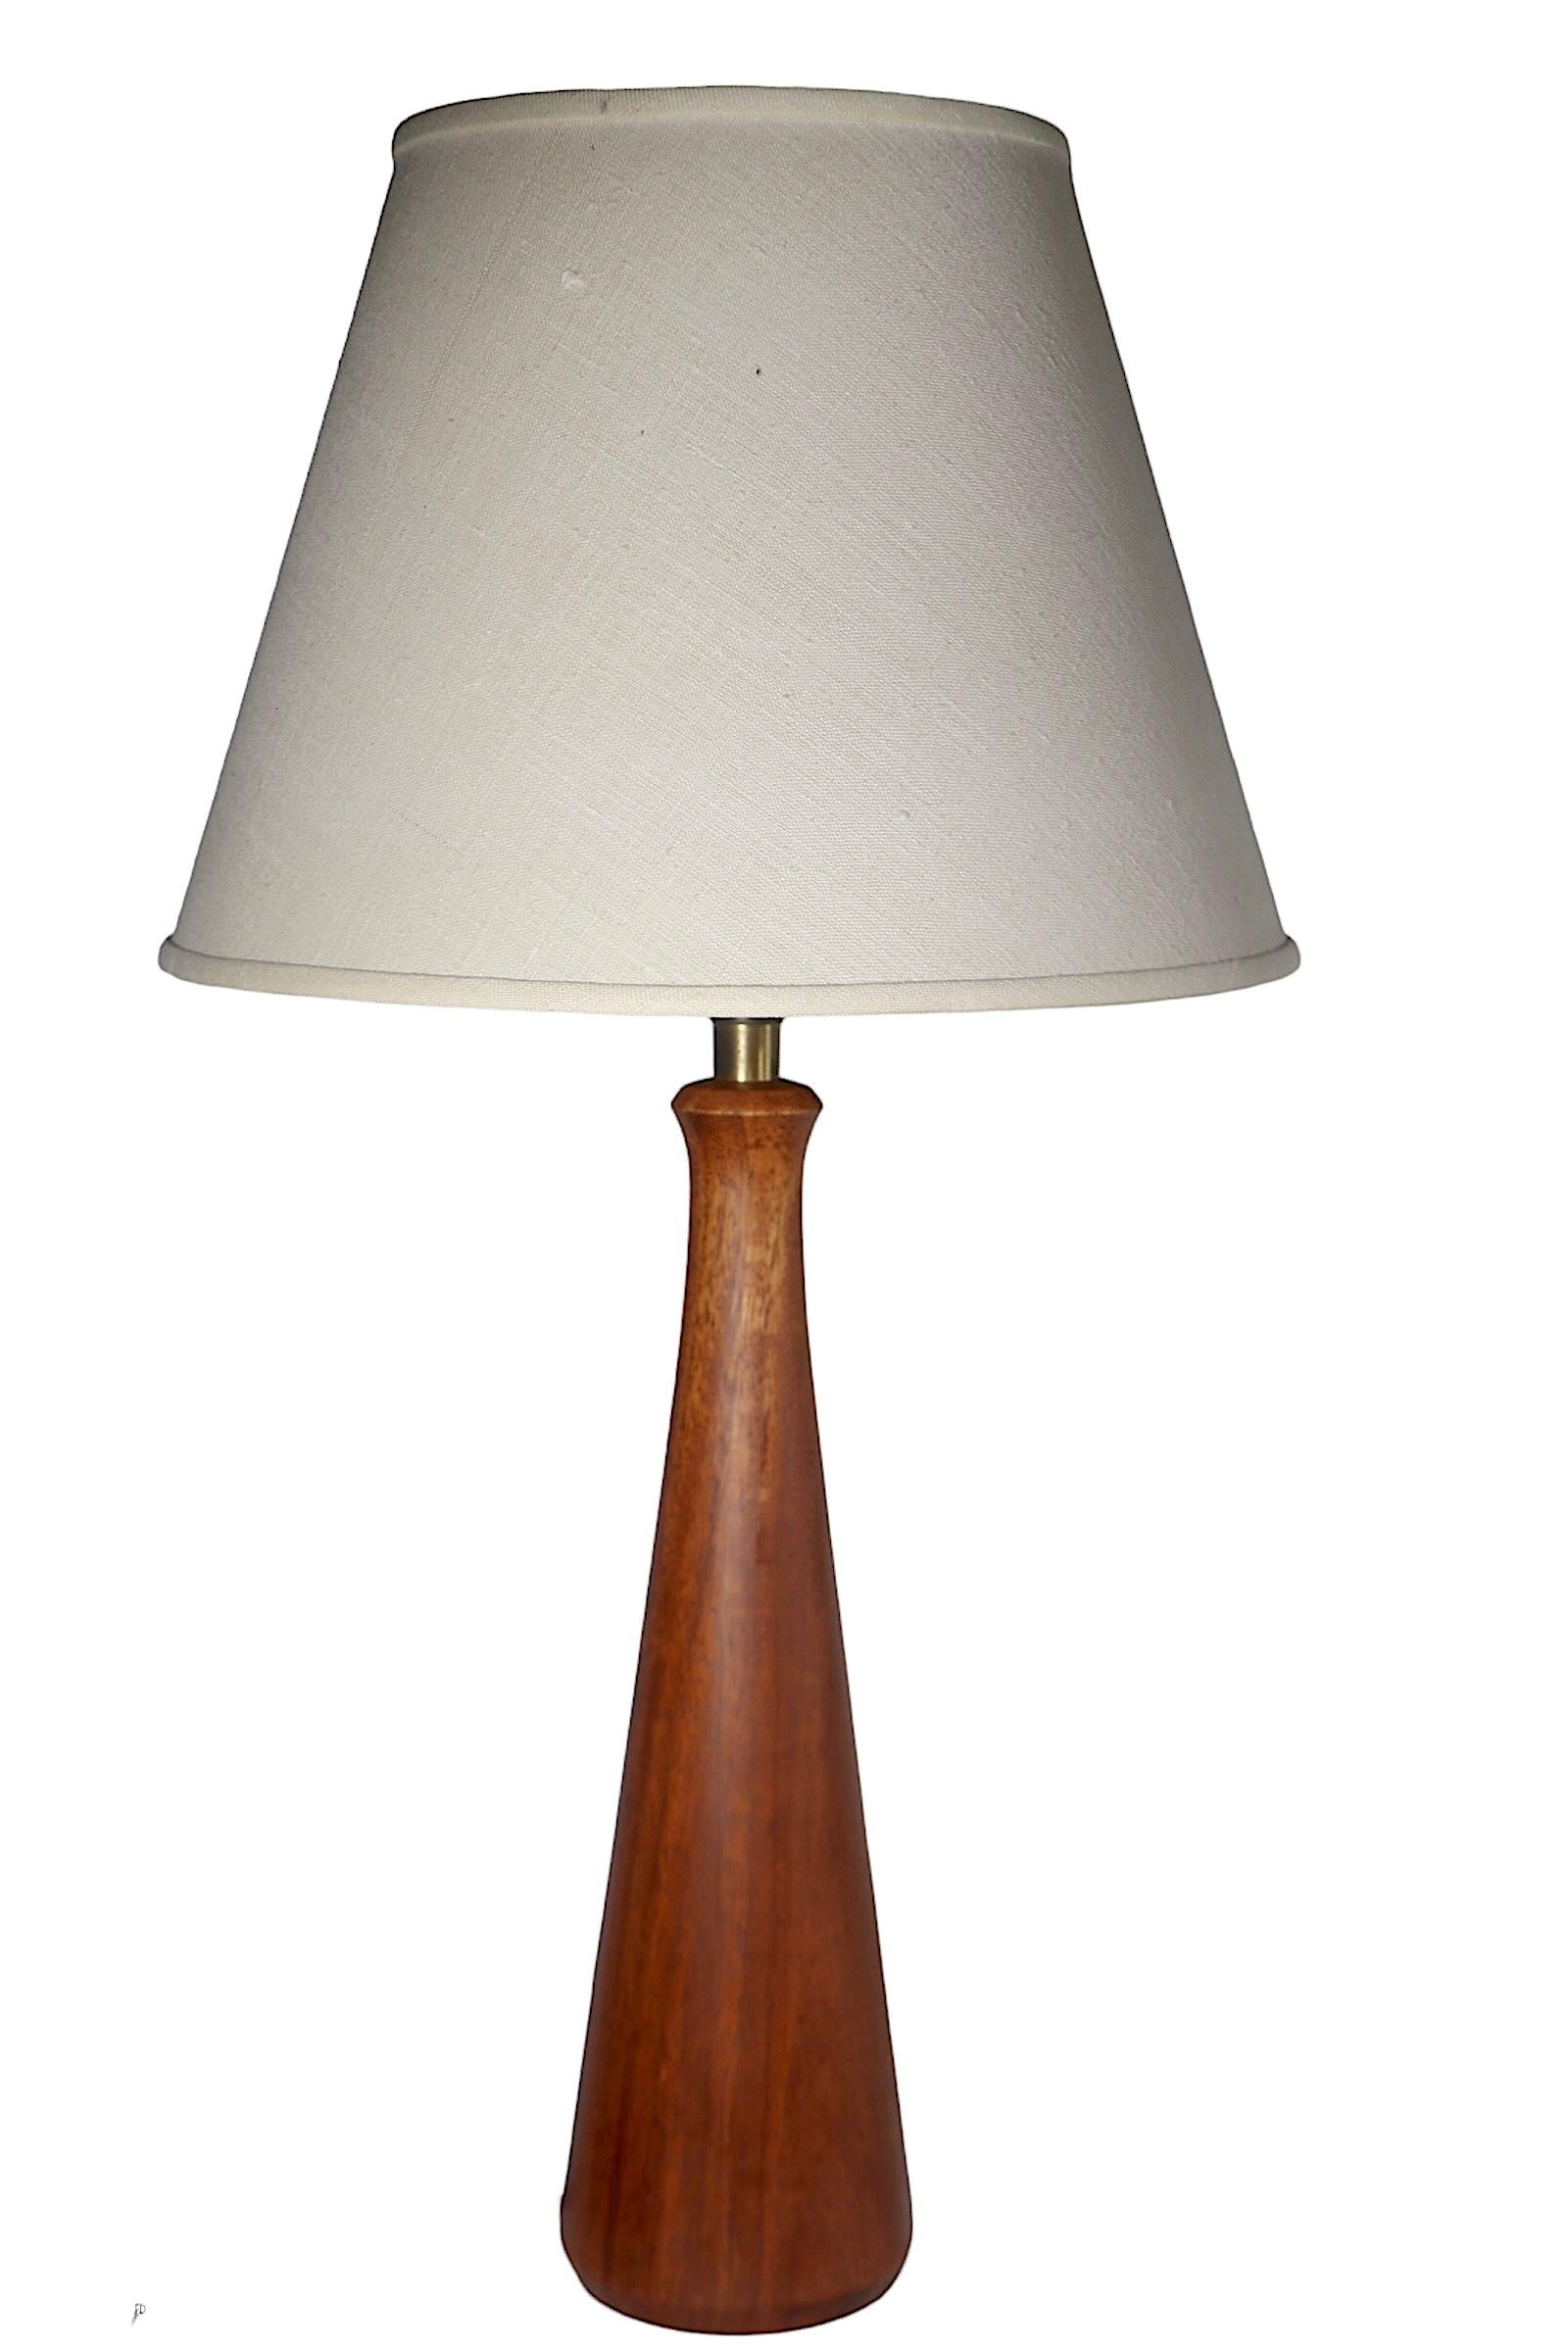  Danish Style Mid Century Wood Table Lamp c 1950/60's For Sale 4